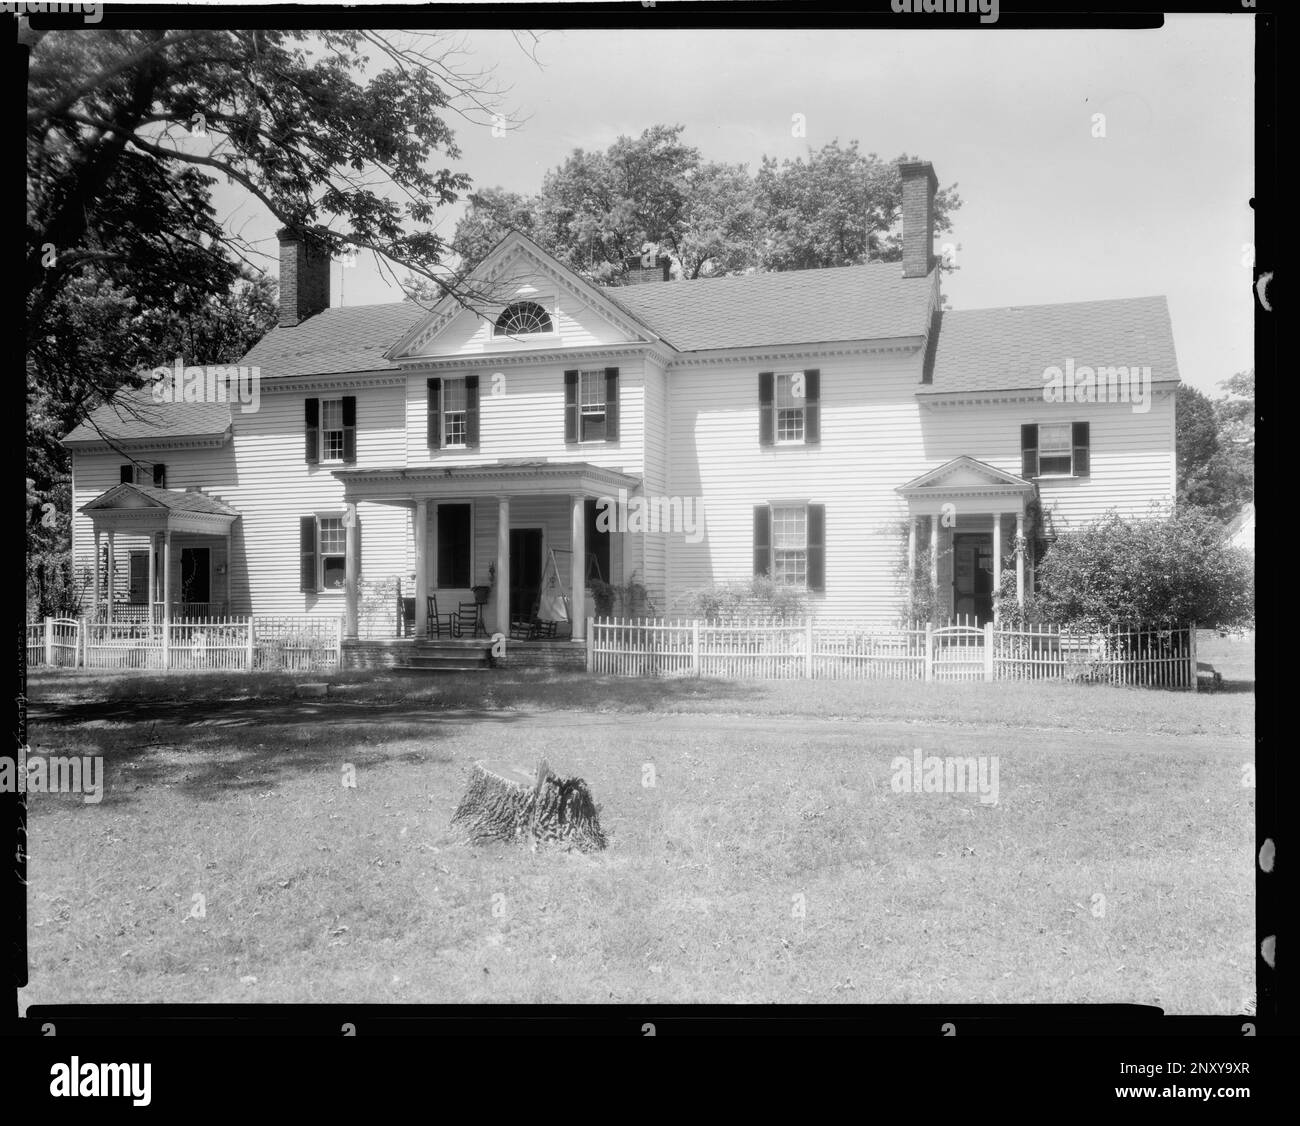 Kendall Grove, Eastville, Northampton County, Virginia. Carnegie Survey of the Architecture of the South. United States  Virginia  Northampton County  Eastville, Porches, Gables, Dwellings. Stock Photo